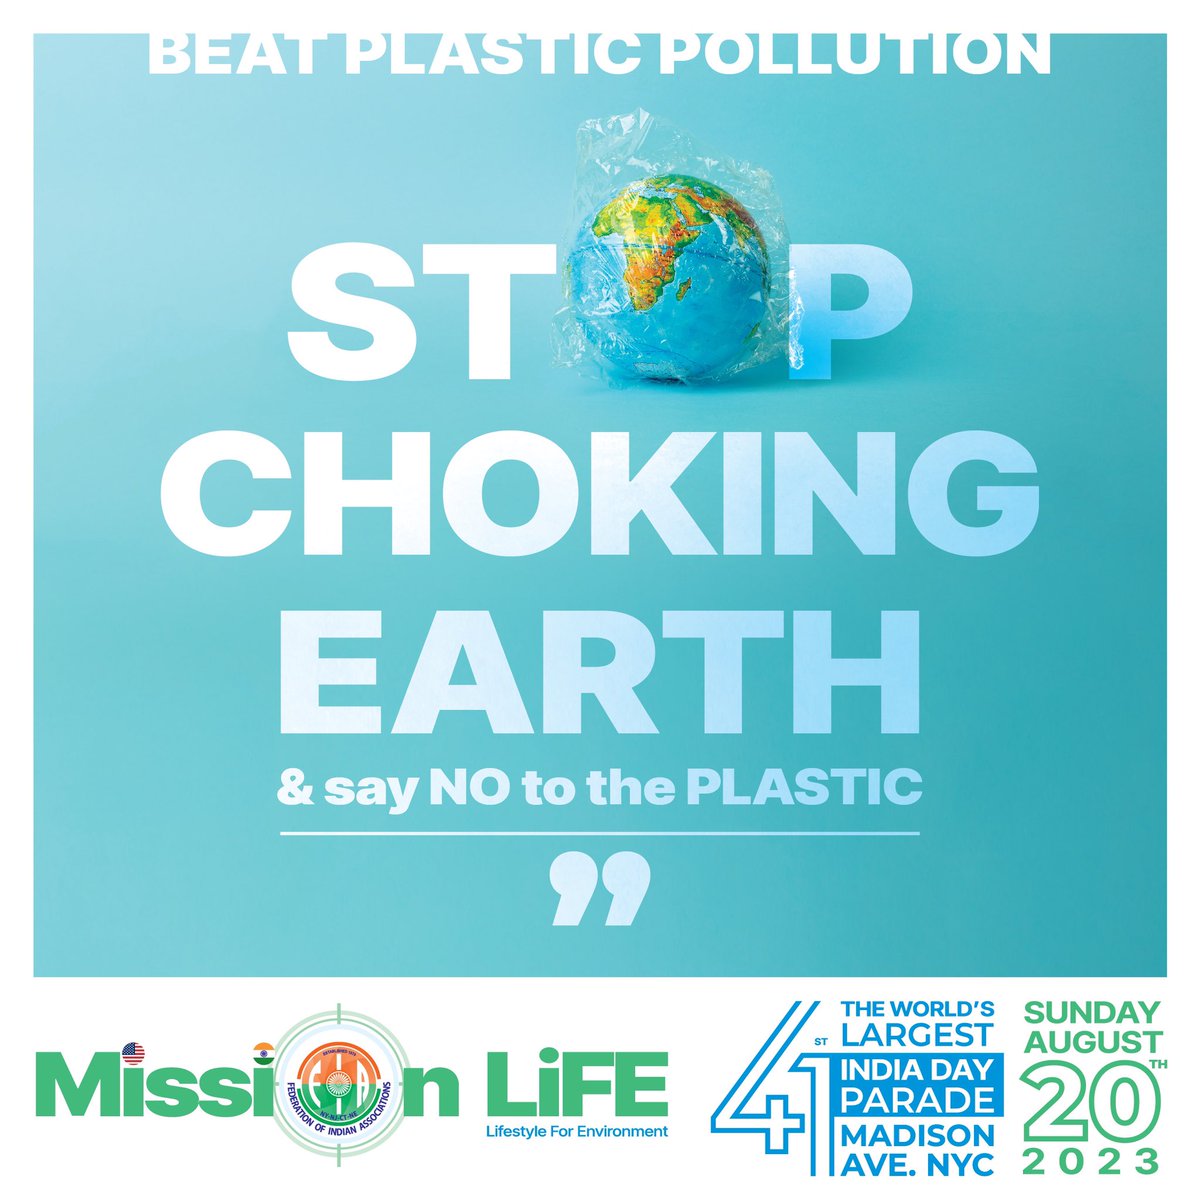 Let’s beat the plastic pollution together ! 

say No to the PLASTIC ❌

#noplastic #NoPlasticChallenge #smallchangebigimpact #missionlife #chooselife #saynotoplastic #savetheplanet #saveearth